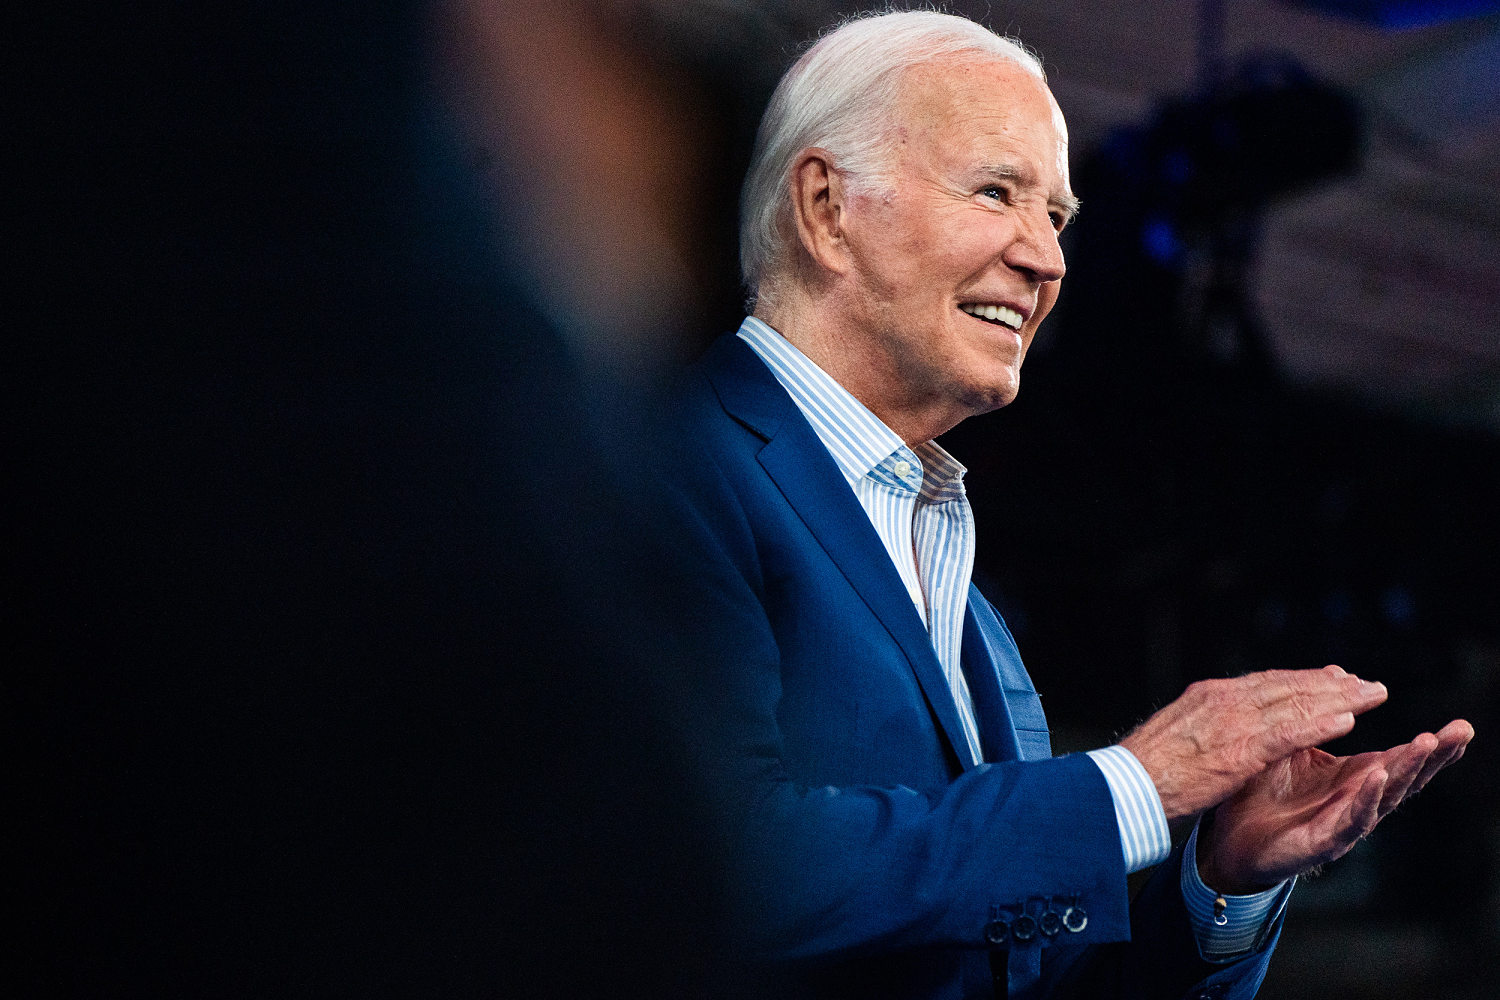 Biden doubles-down at Wisconsin rally: 'I'm staying in the race'